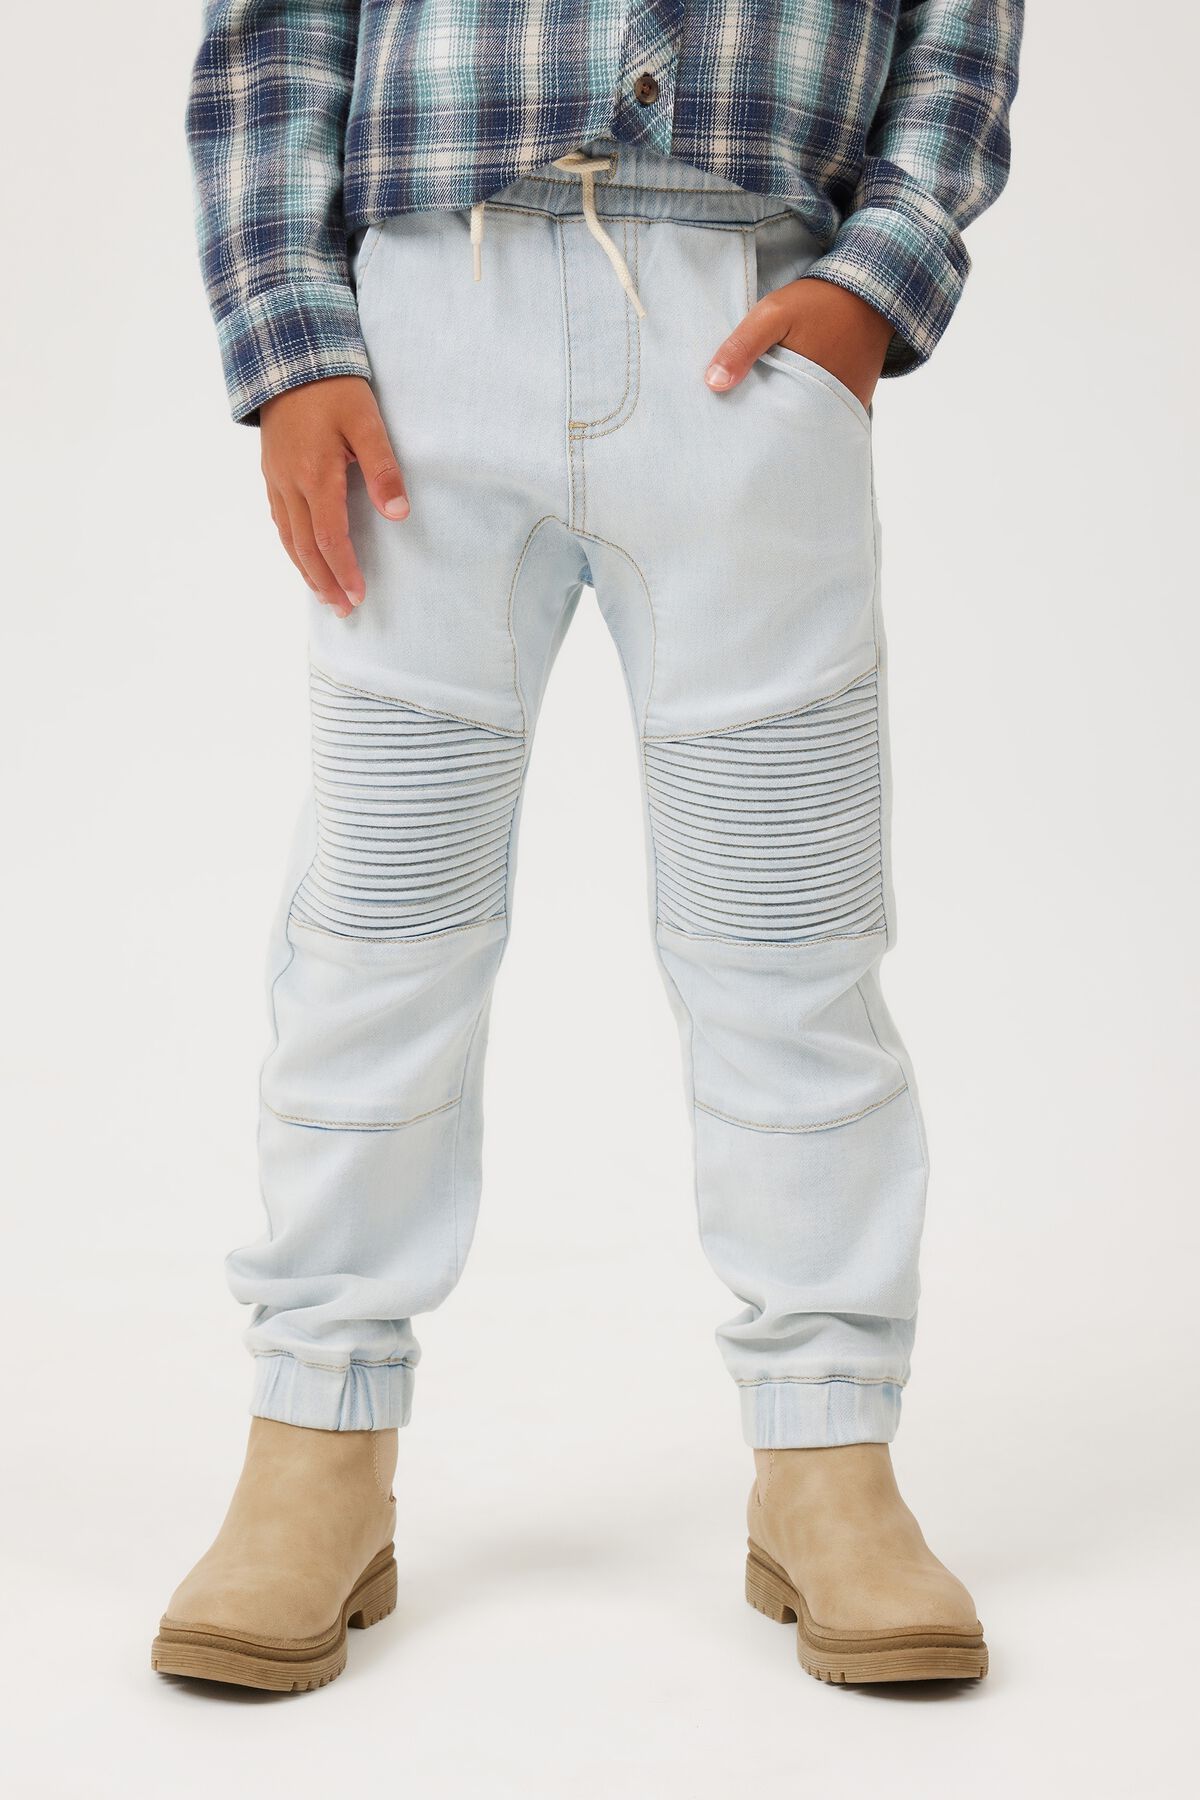 Slouch Jogger Jean | Cotton On (ANZ)